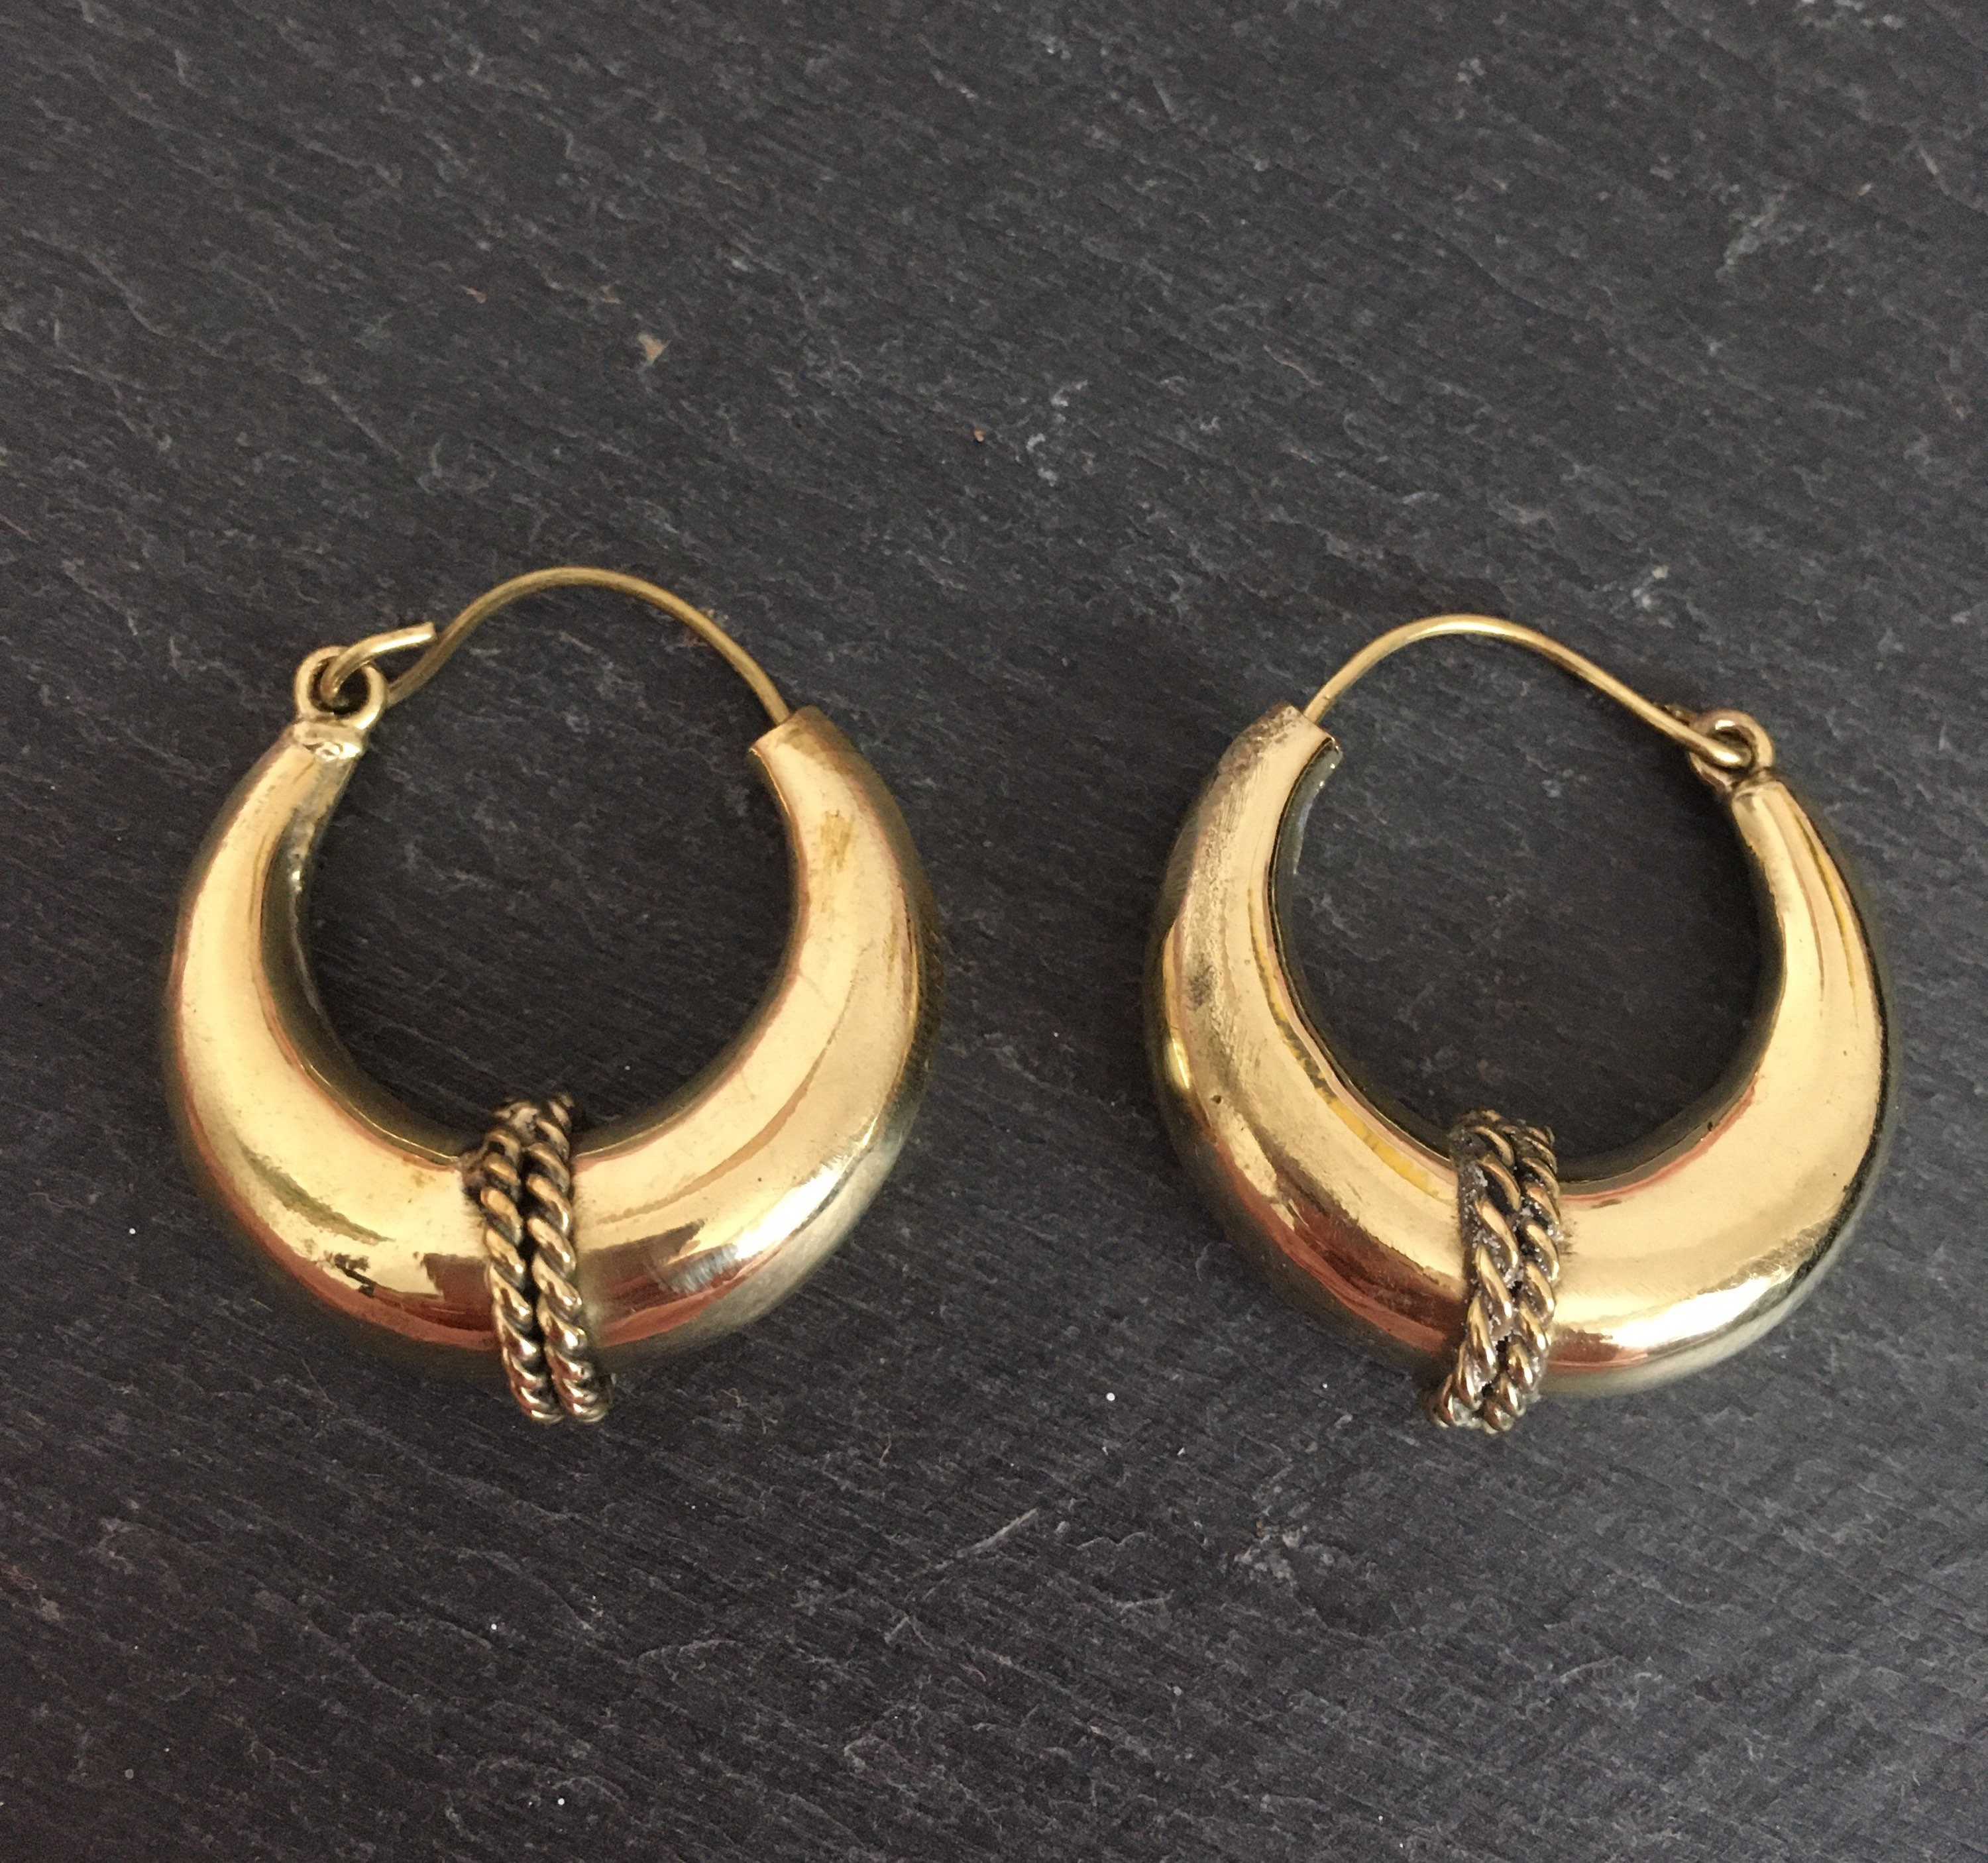 Brass hoop earrings with detailed band. | Etsy